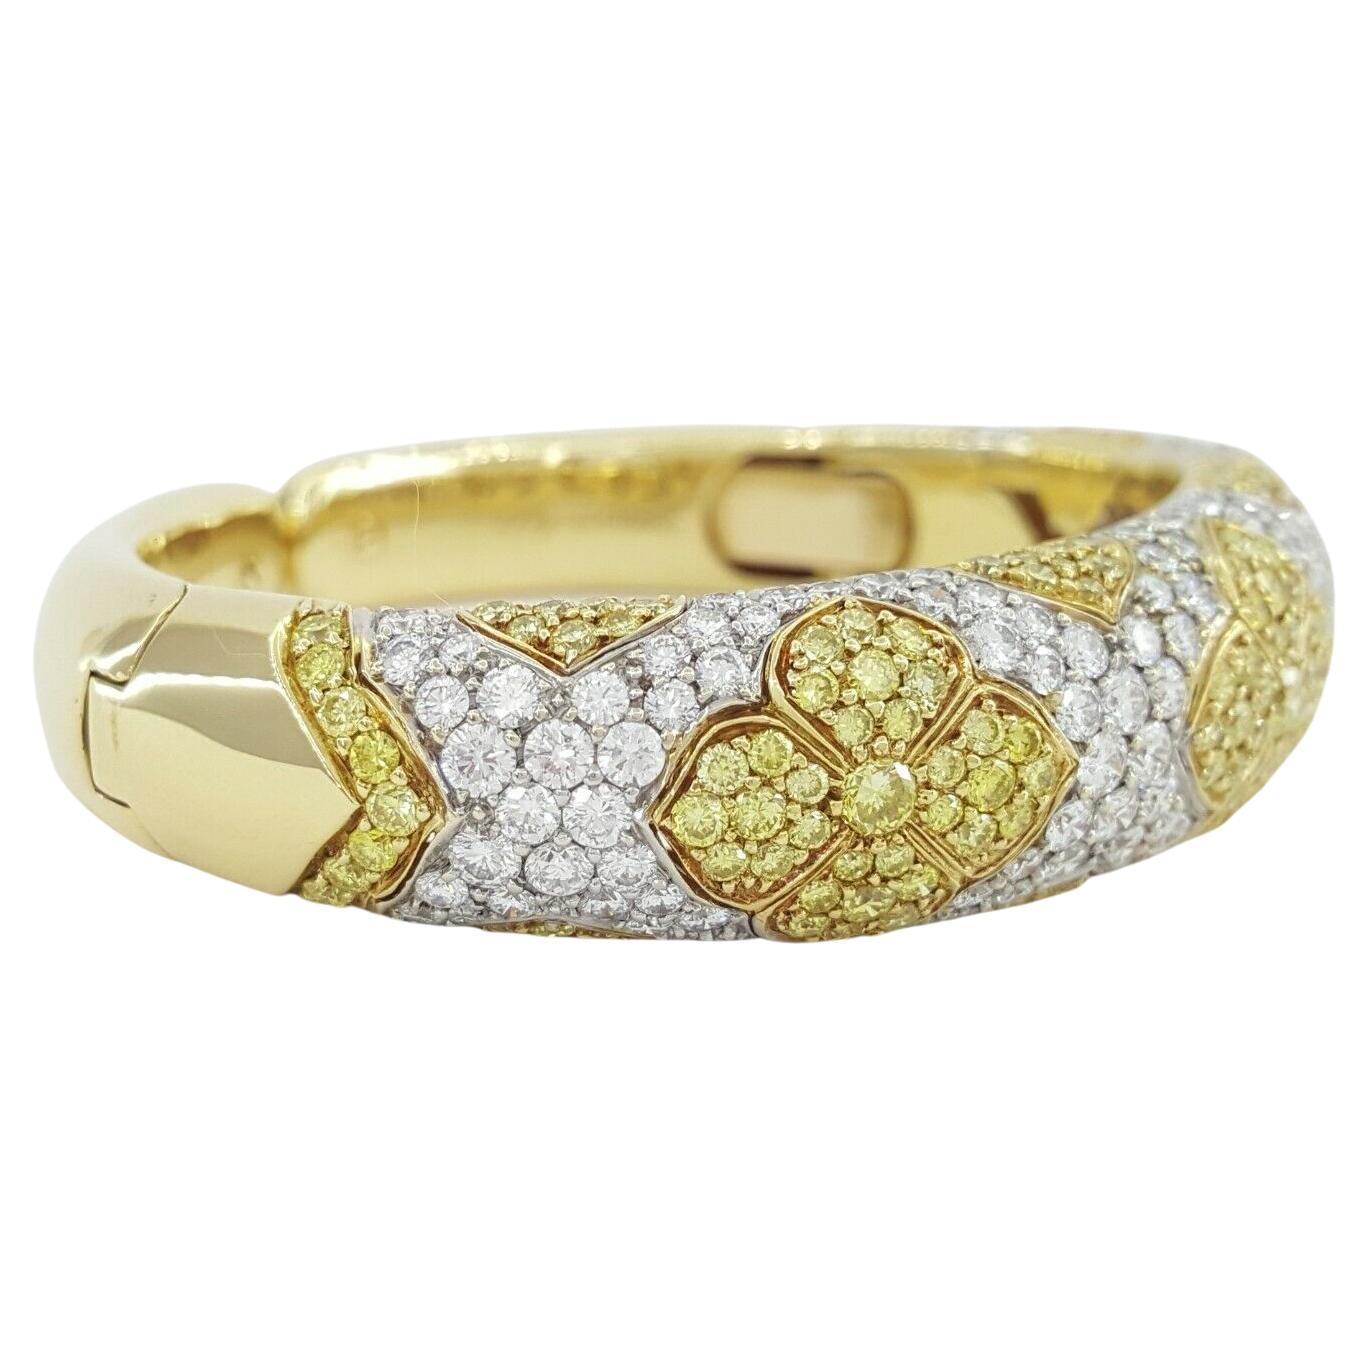 Bvlgari 10.69 ct Yellow & White Diamond 18k Yellow Gold Cuff Bangle. 

The bracelet weighs 60.5 grams. The measurements of the bracelet are 6.25